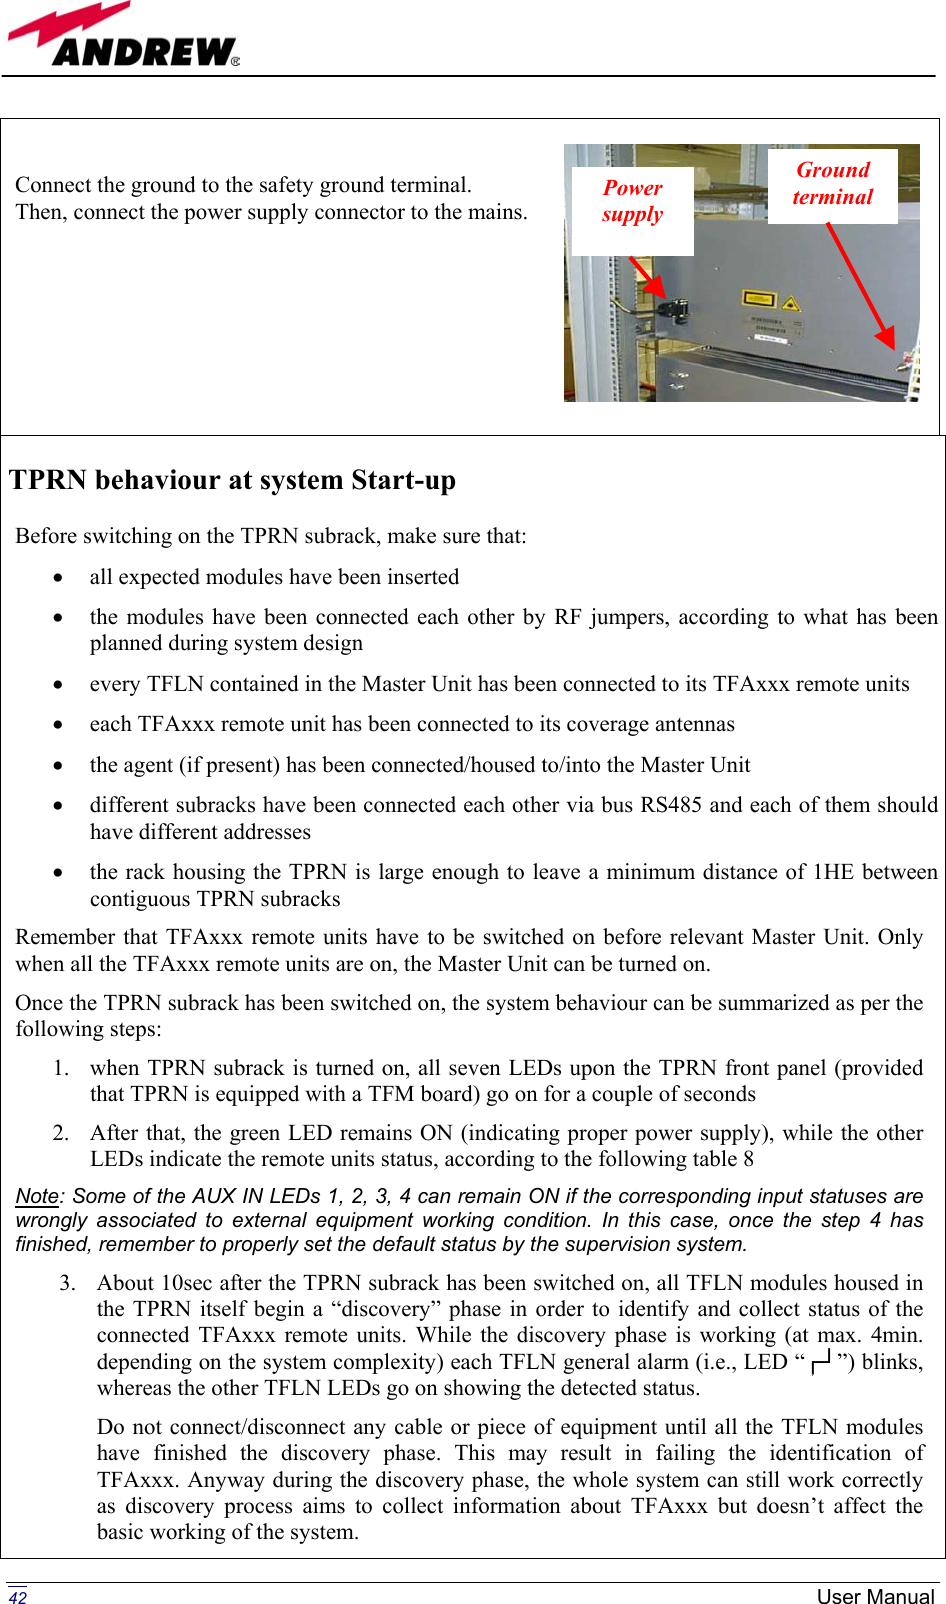 Page 17 of Andrew Wireless Innovations Group BCP-TFAM26 Model TFAM26 Downlink Booster User Manual 